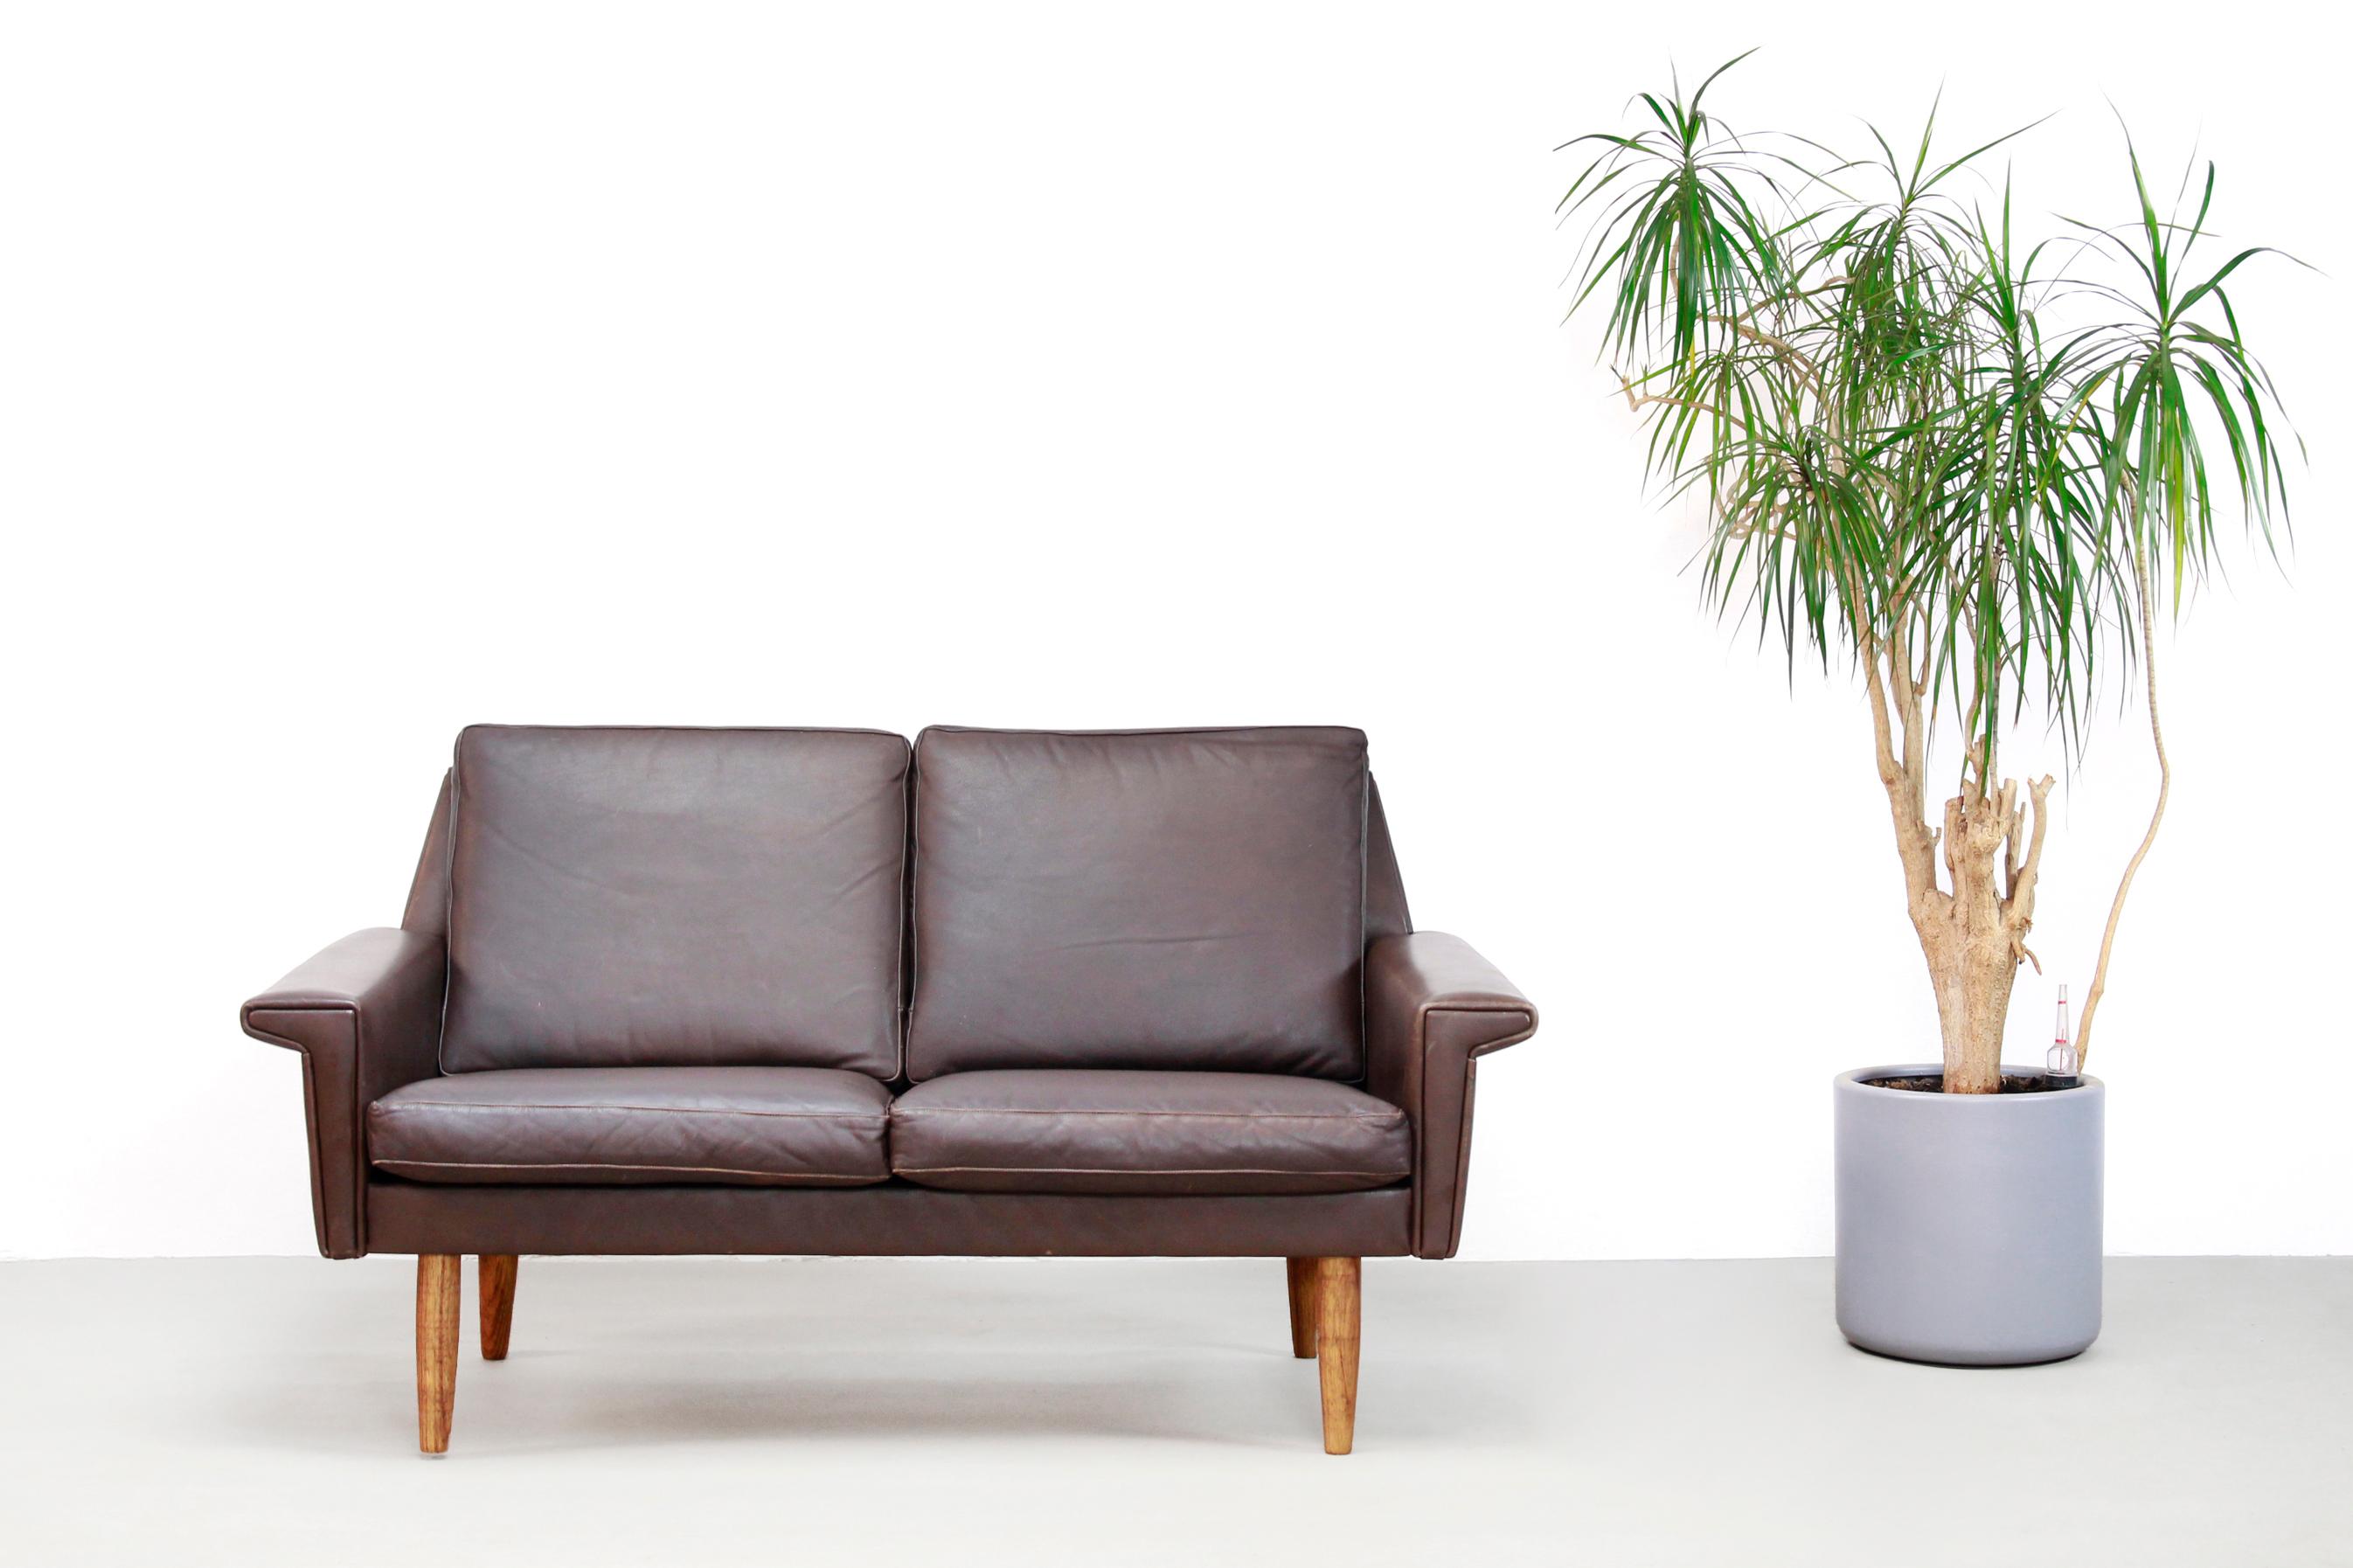 Dark brown leather Danish design sofa, produced by Vejen Polstermøbelfabrik from Denmark. This two-seat is made of brown leather with conical light wooden legs. The sofa has a very beautiful Mid-Century Modernist design which appearance does not